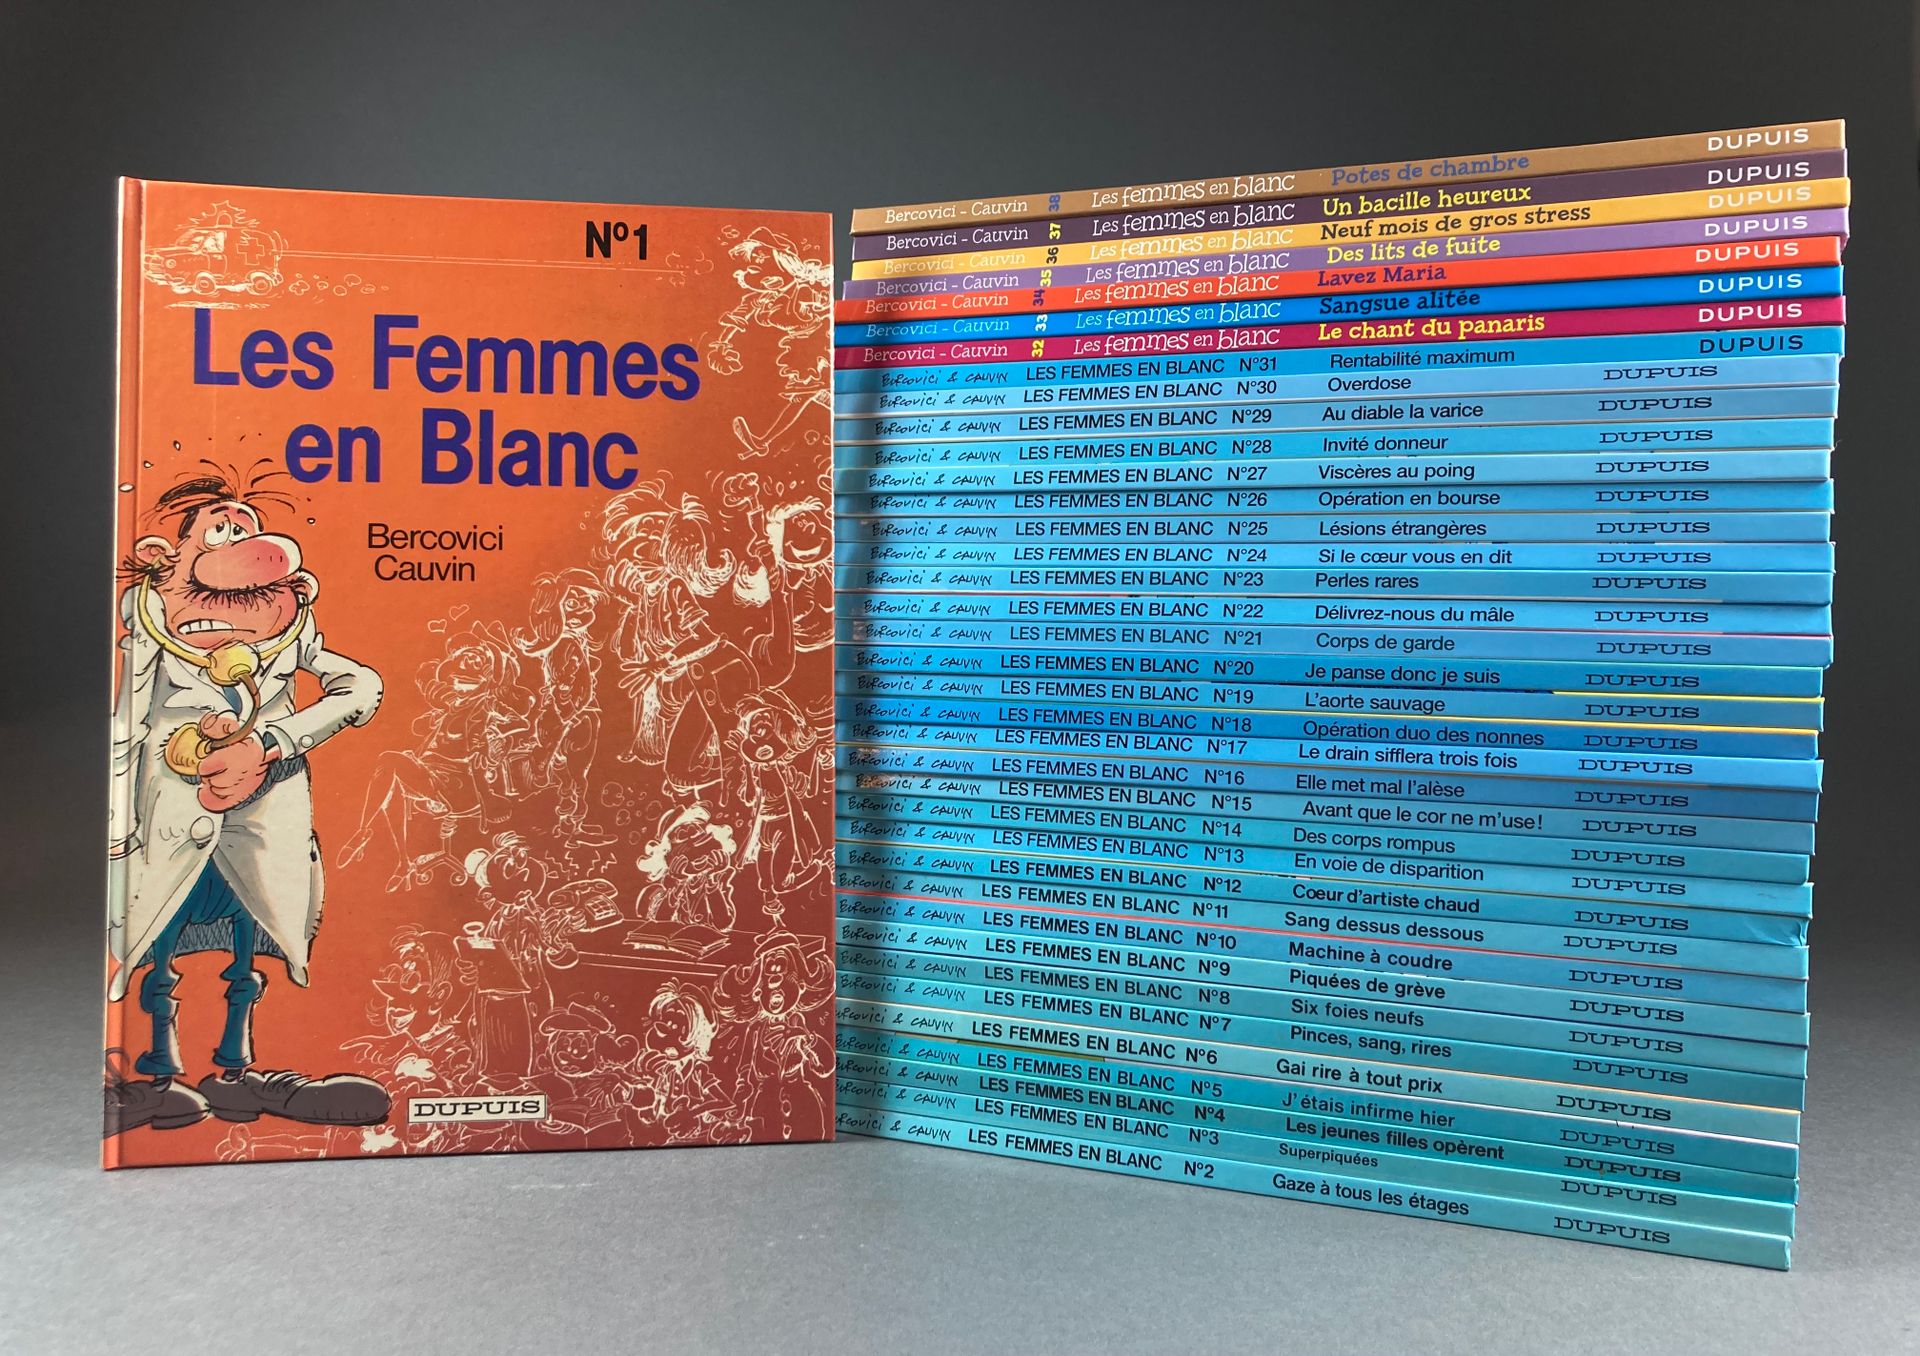 Bercovici - Femmes en blanc (Les) Volumes 1 to 38, from Women in White (1986) to&hellip;